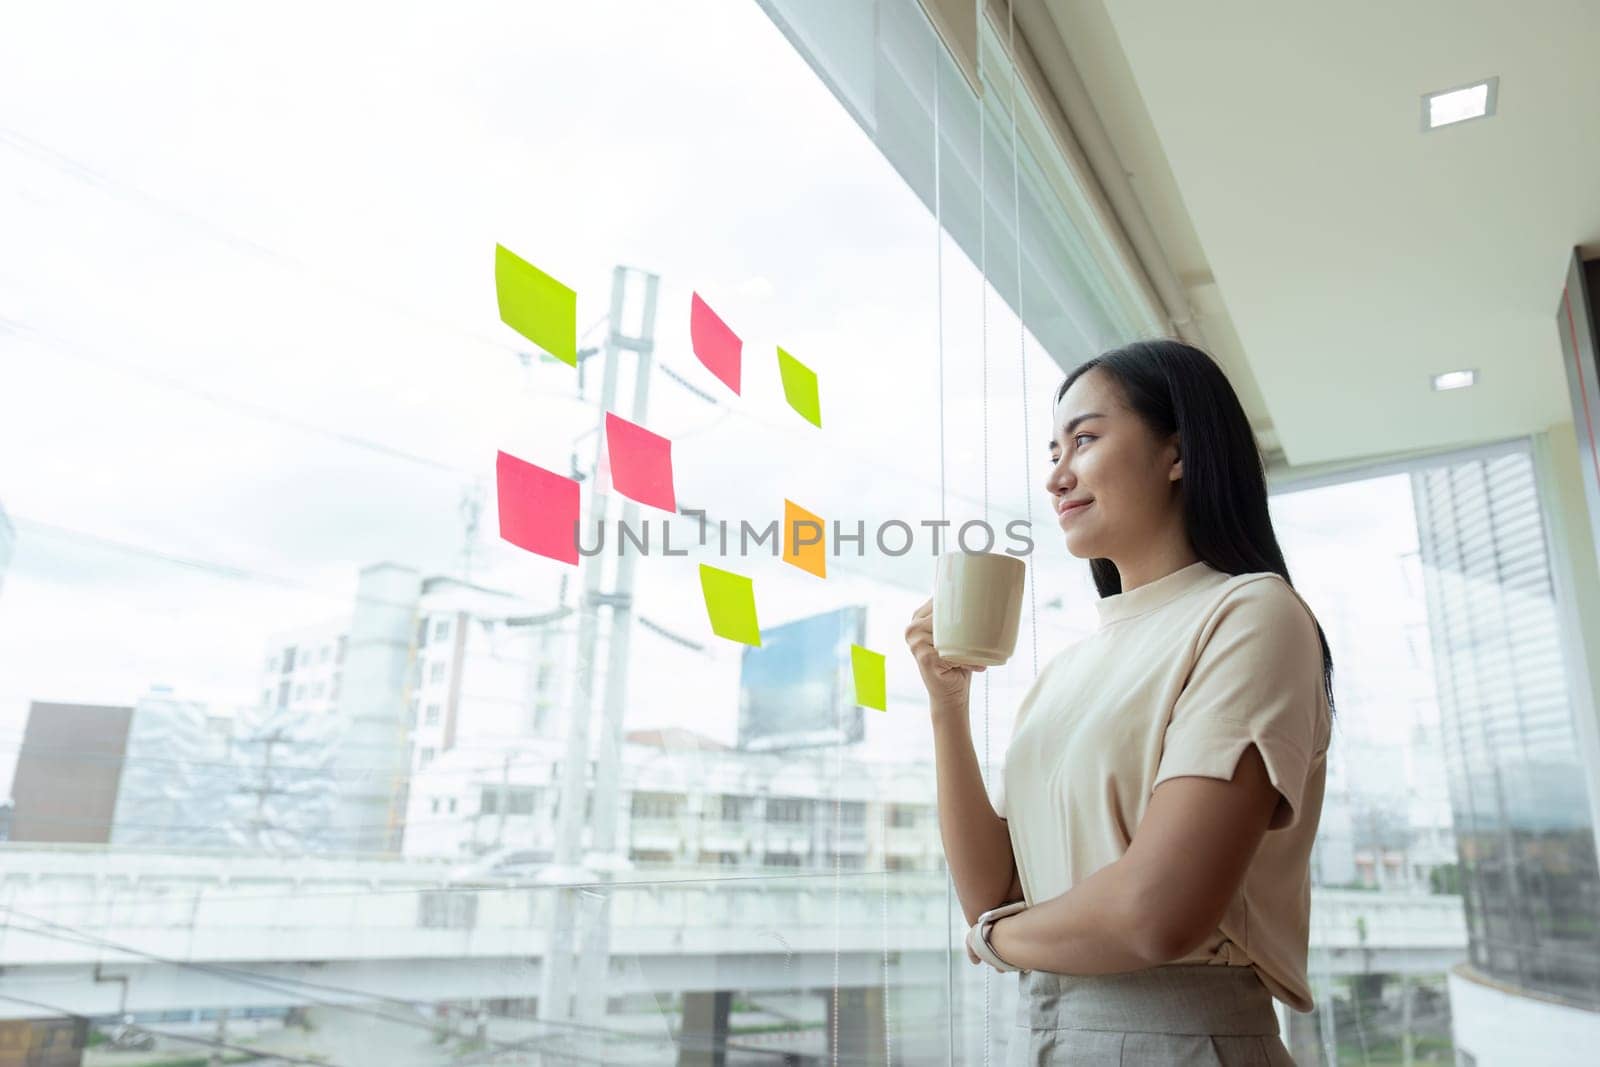 Businesswoman brainstorming ideas while looking at sticky notes on a window in a modern office setting, focusing on planning and creativity